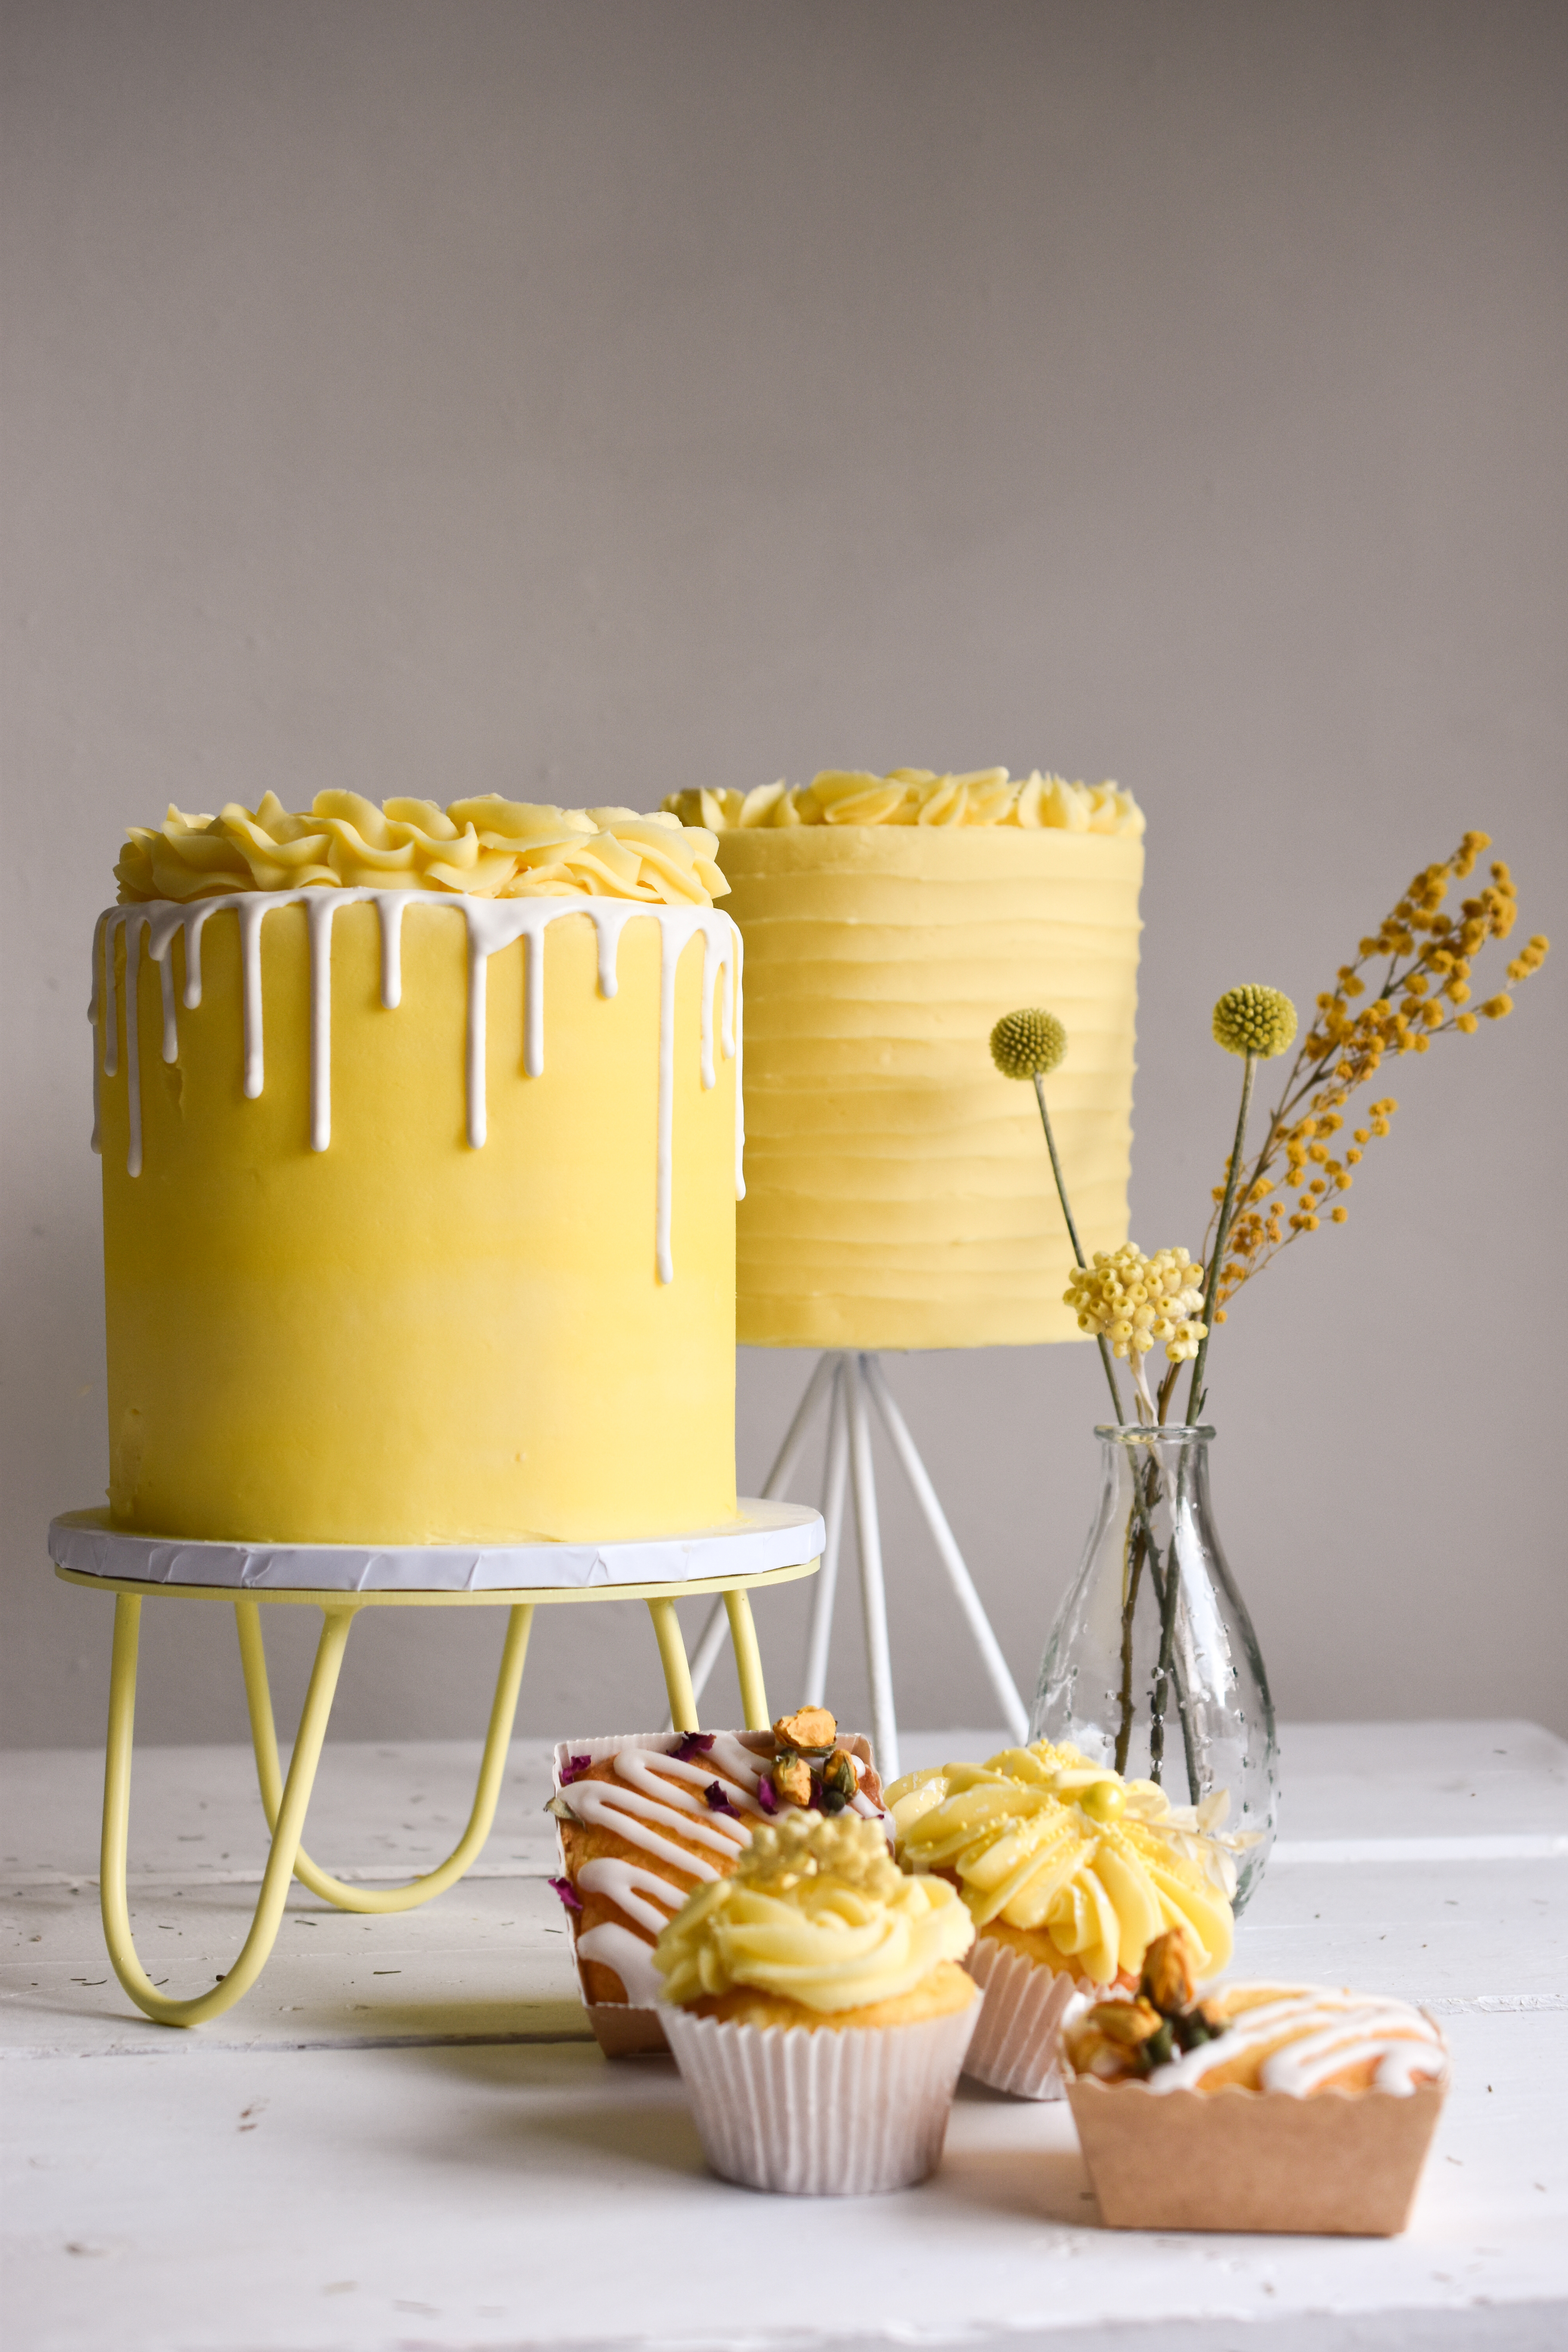 Yellow Cakes and Cookies - American Cake Decorating